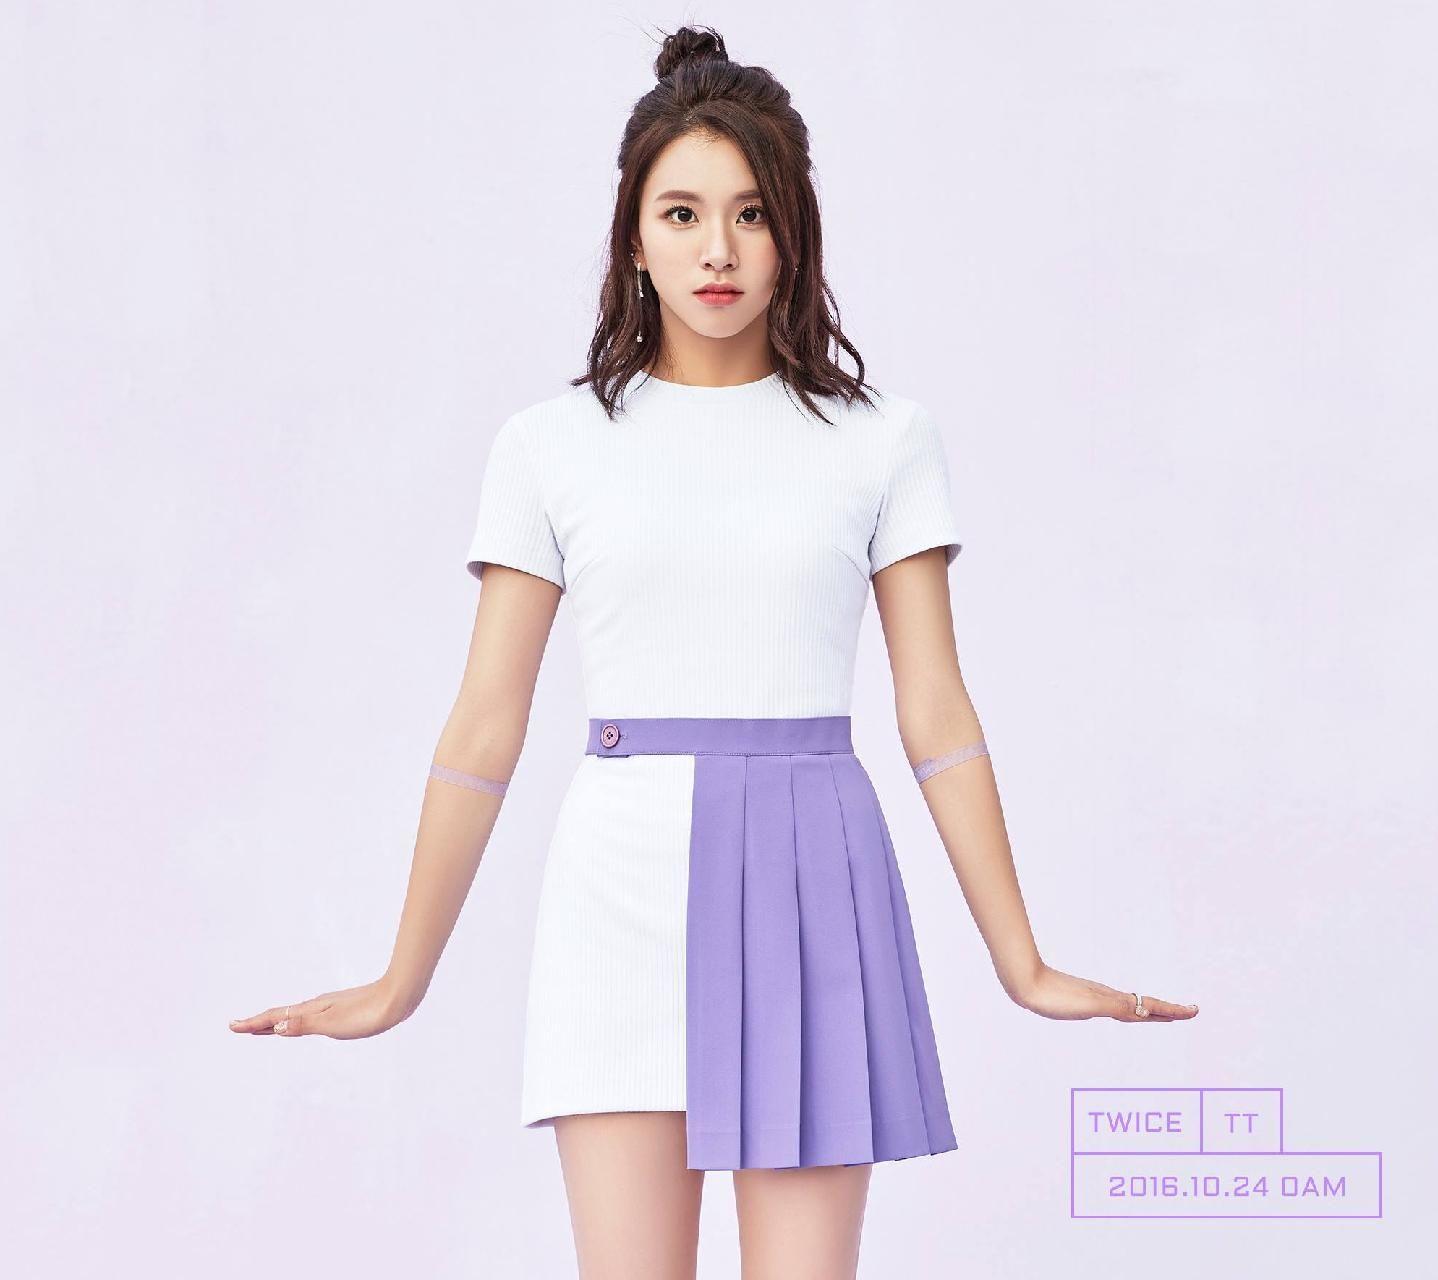 TWICE Chaeyoung Wallpaper